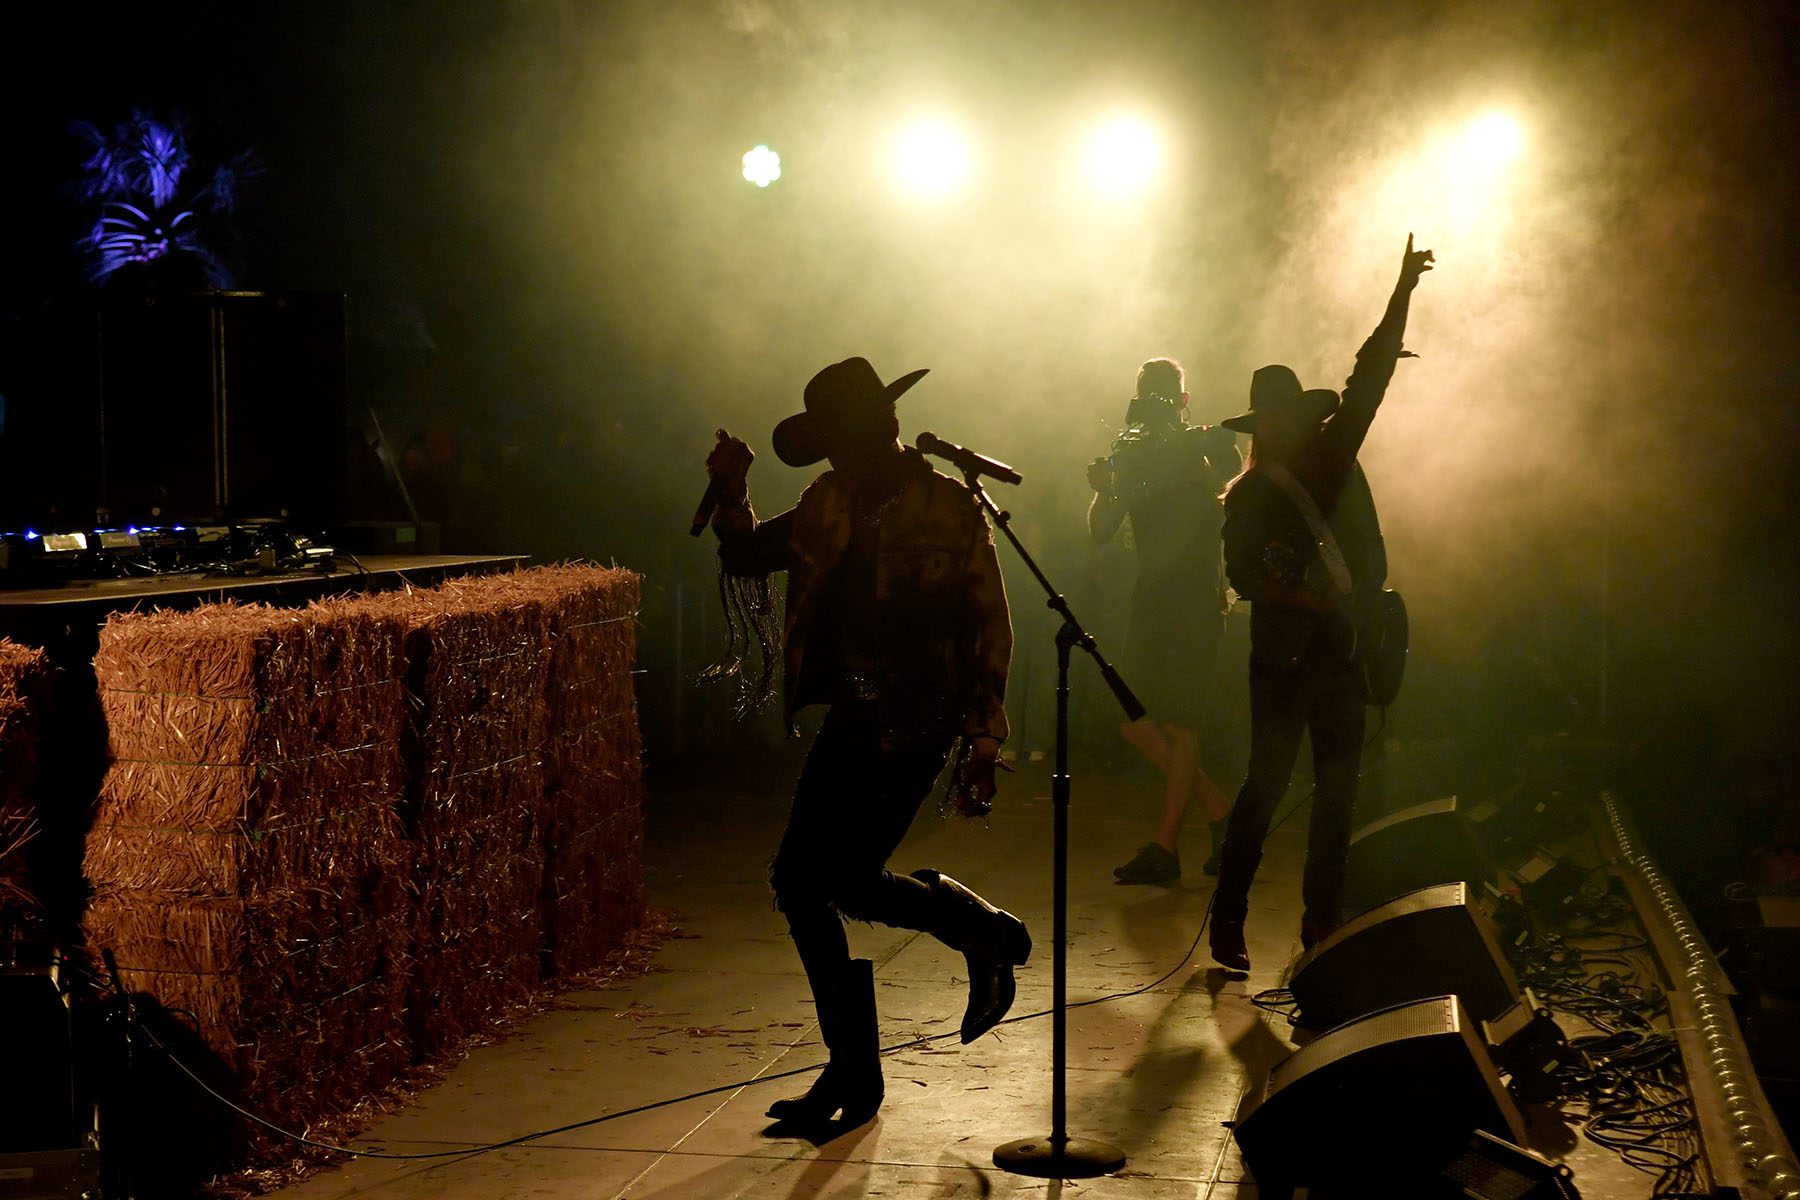 The silhouetted figures of Lil Nas X and Billy Ray Cyrus are seen singing and dancing on stage.